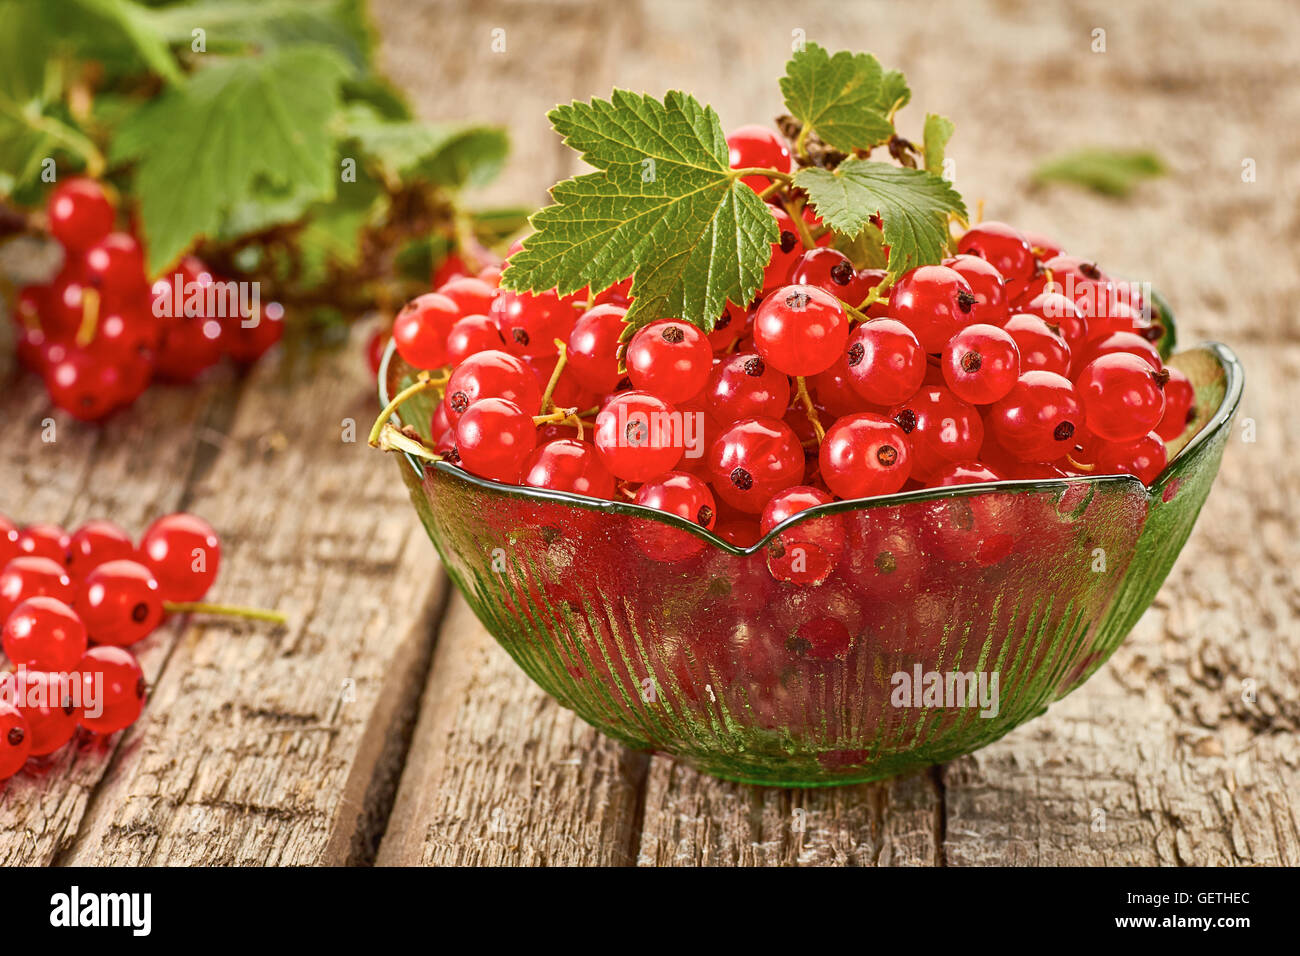 Red currant in glass bowl on wooden table Stock Photo